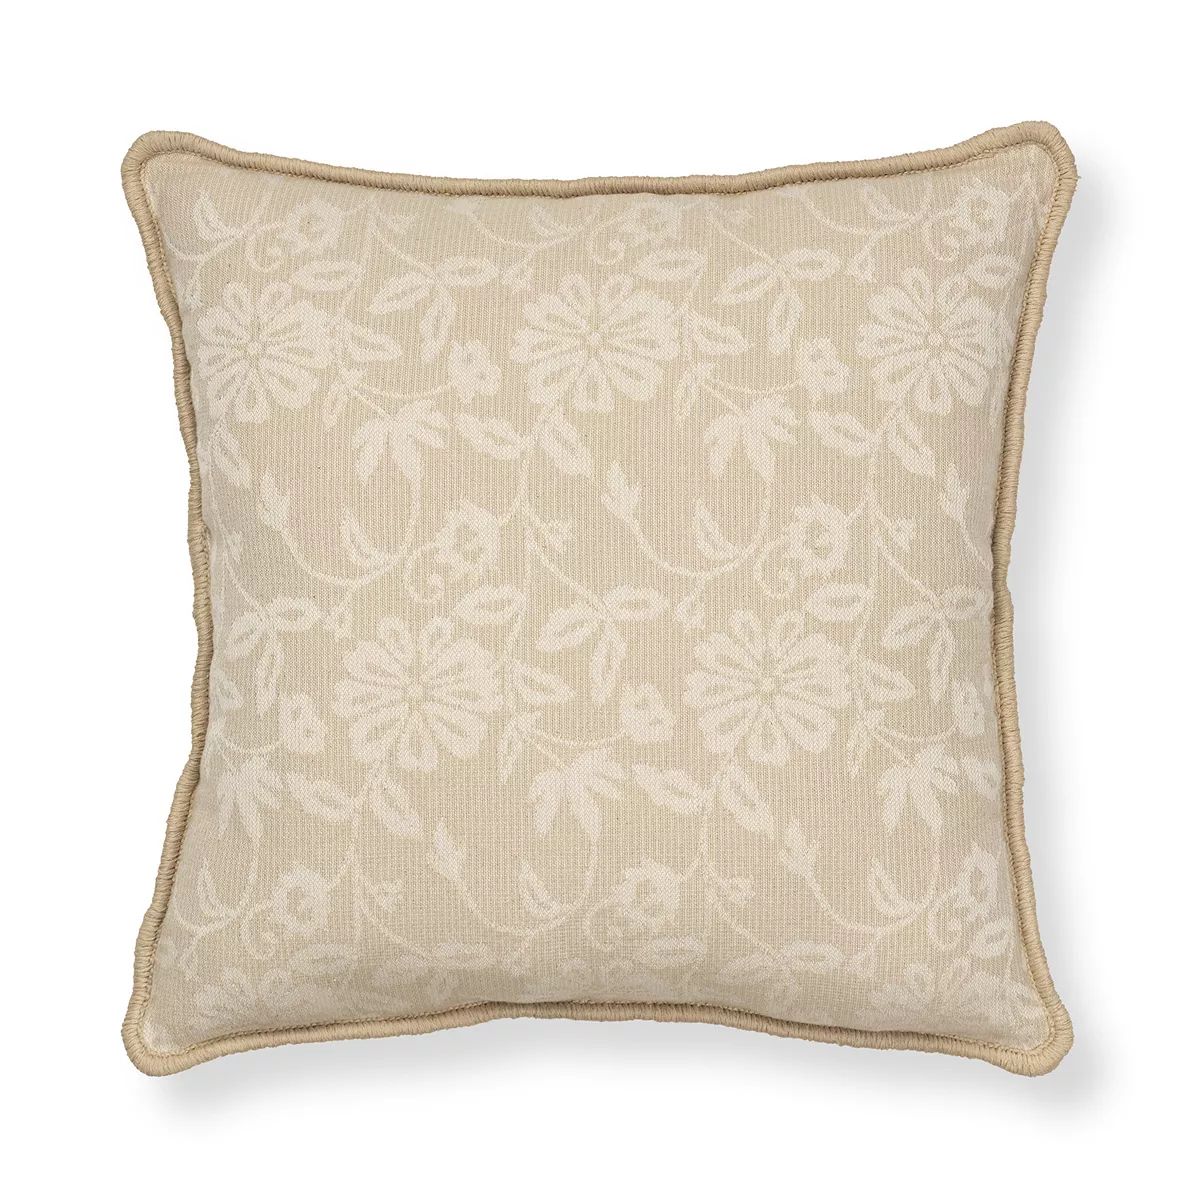 Sonoma Goods For Life® 18x18 Tan Woven Floral Pillow | Kohl's